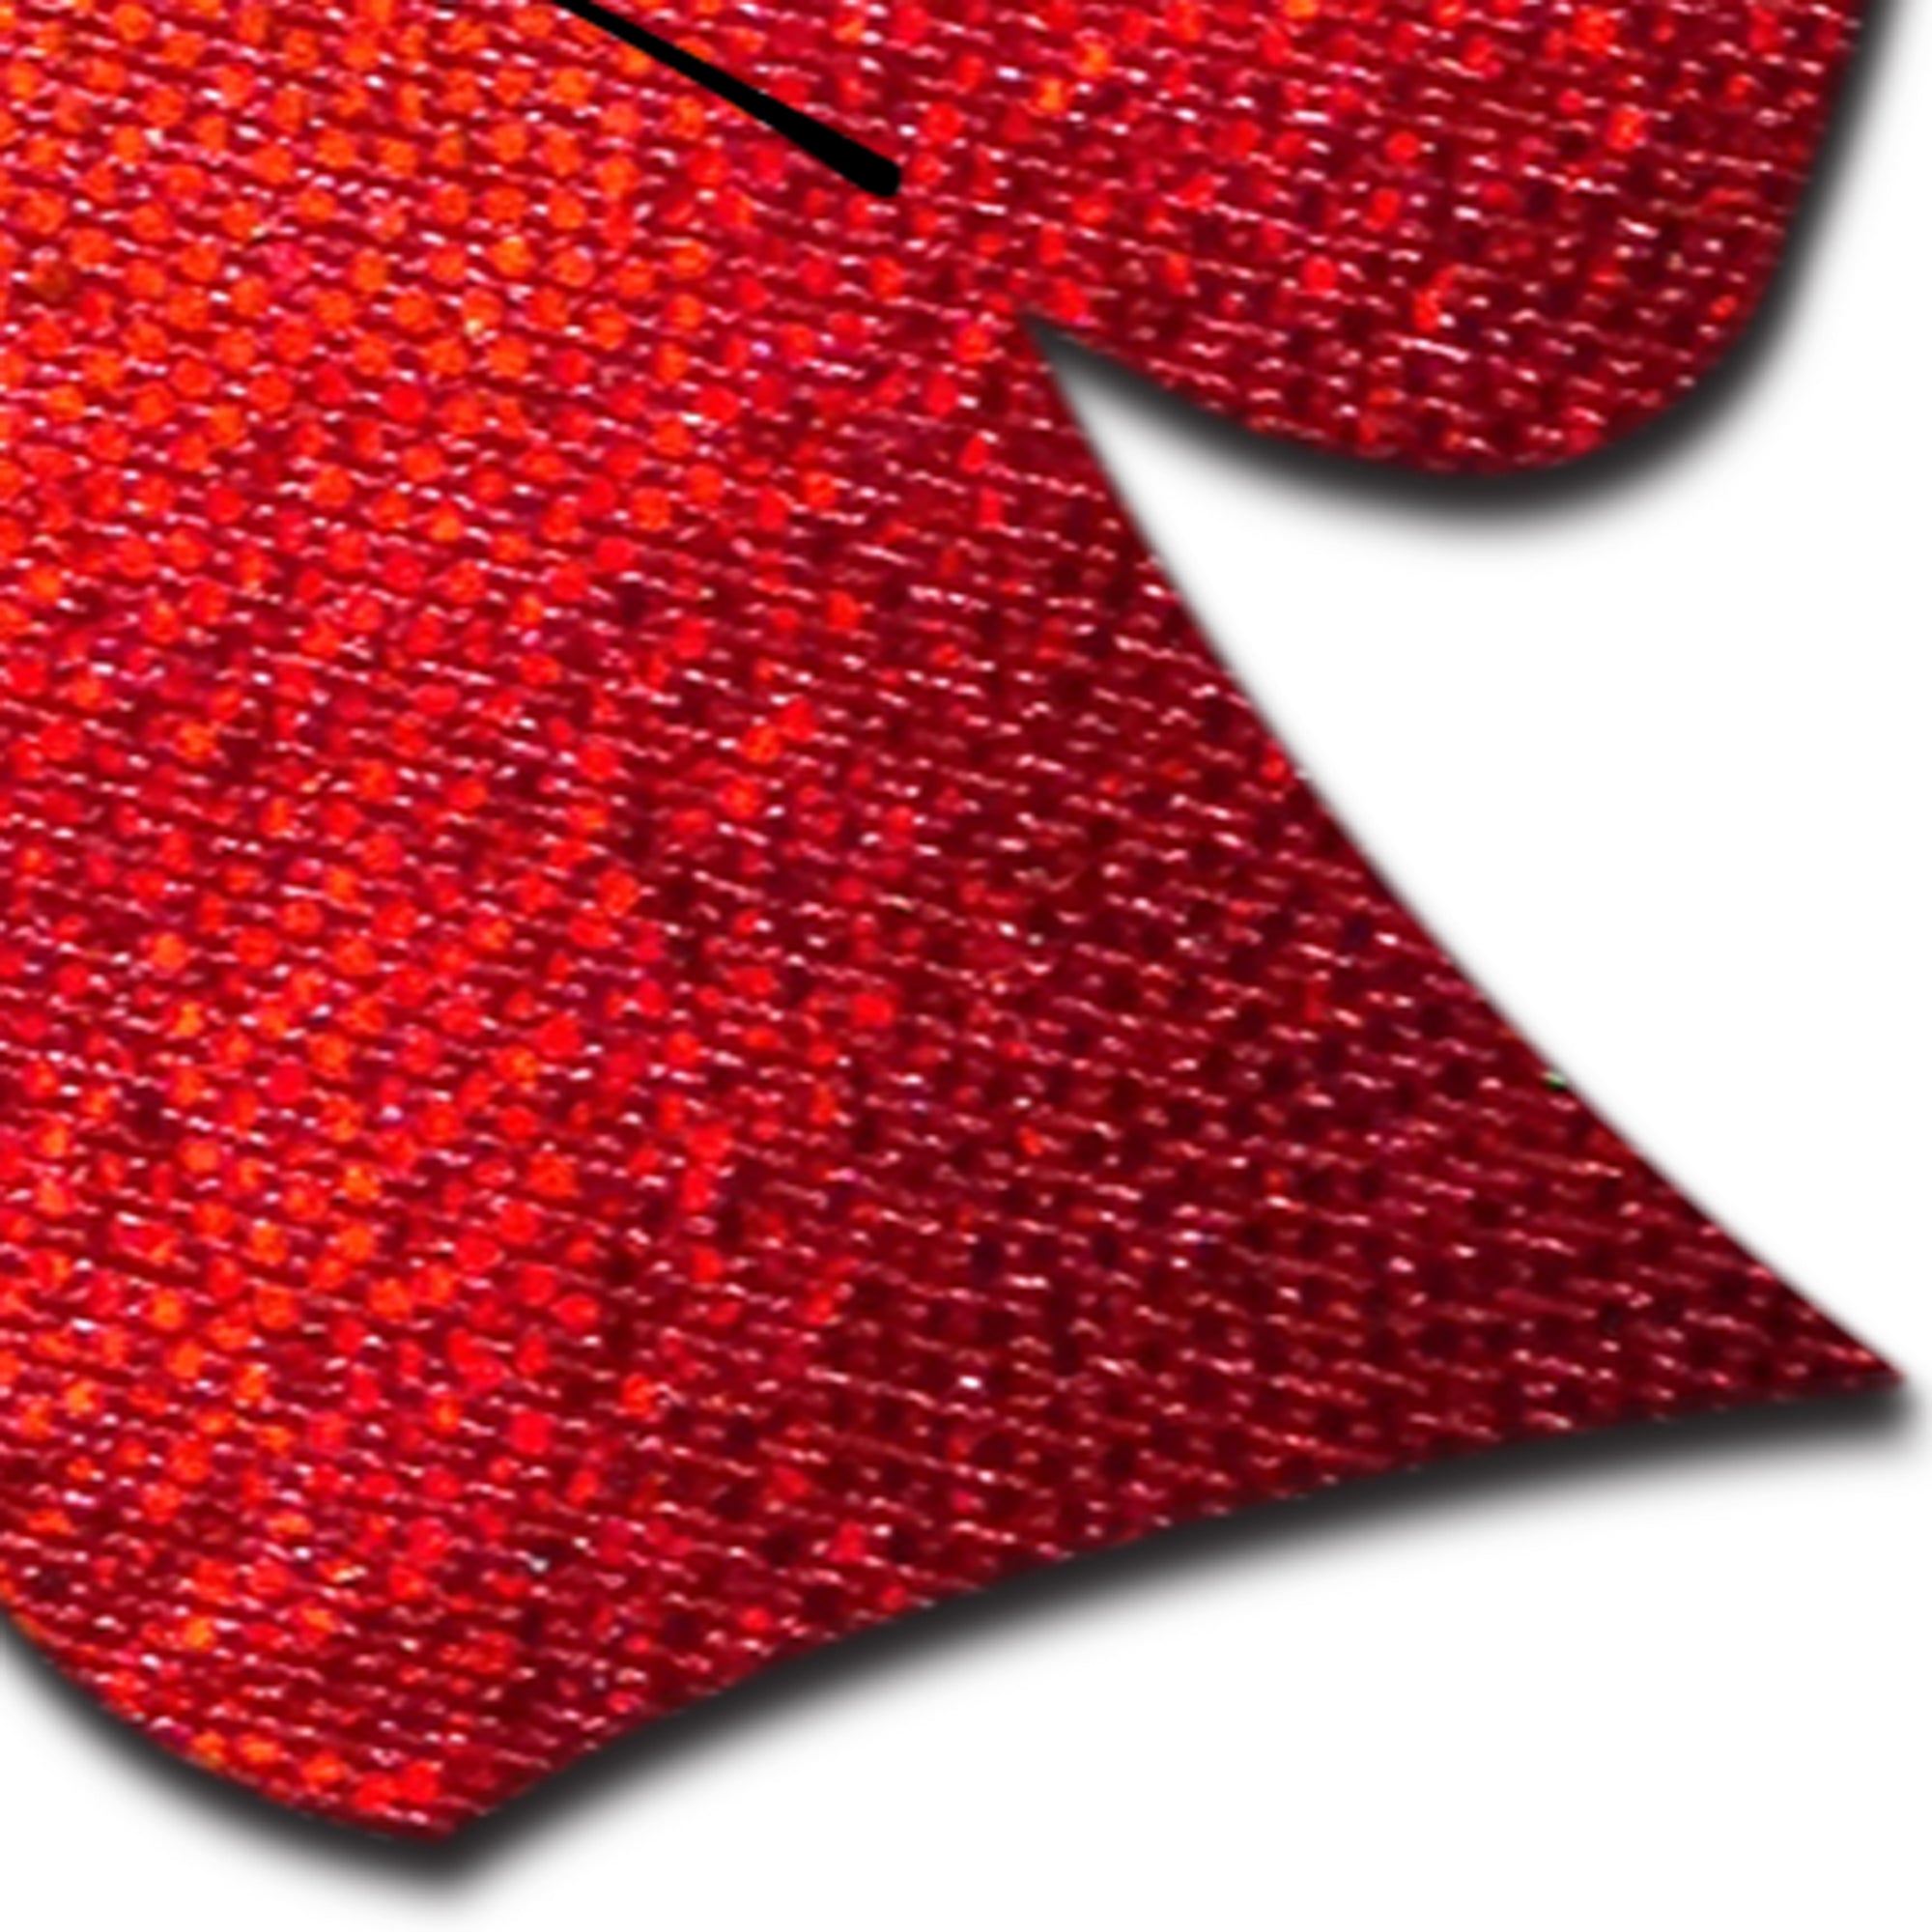 5 Pack: Coverage: Bow Red Holographic Breast Covers Support Tape by Pastease